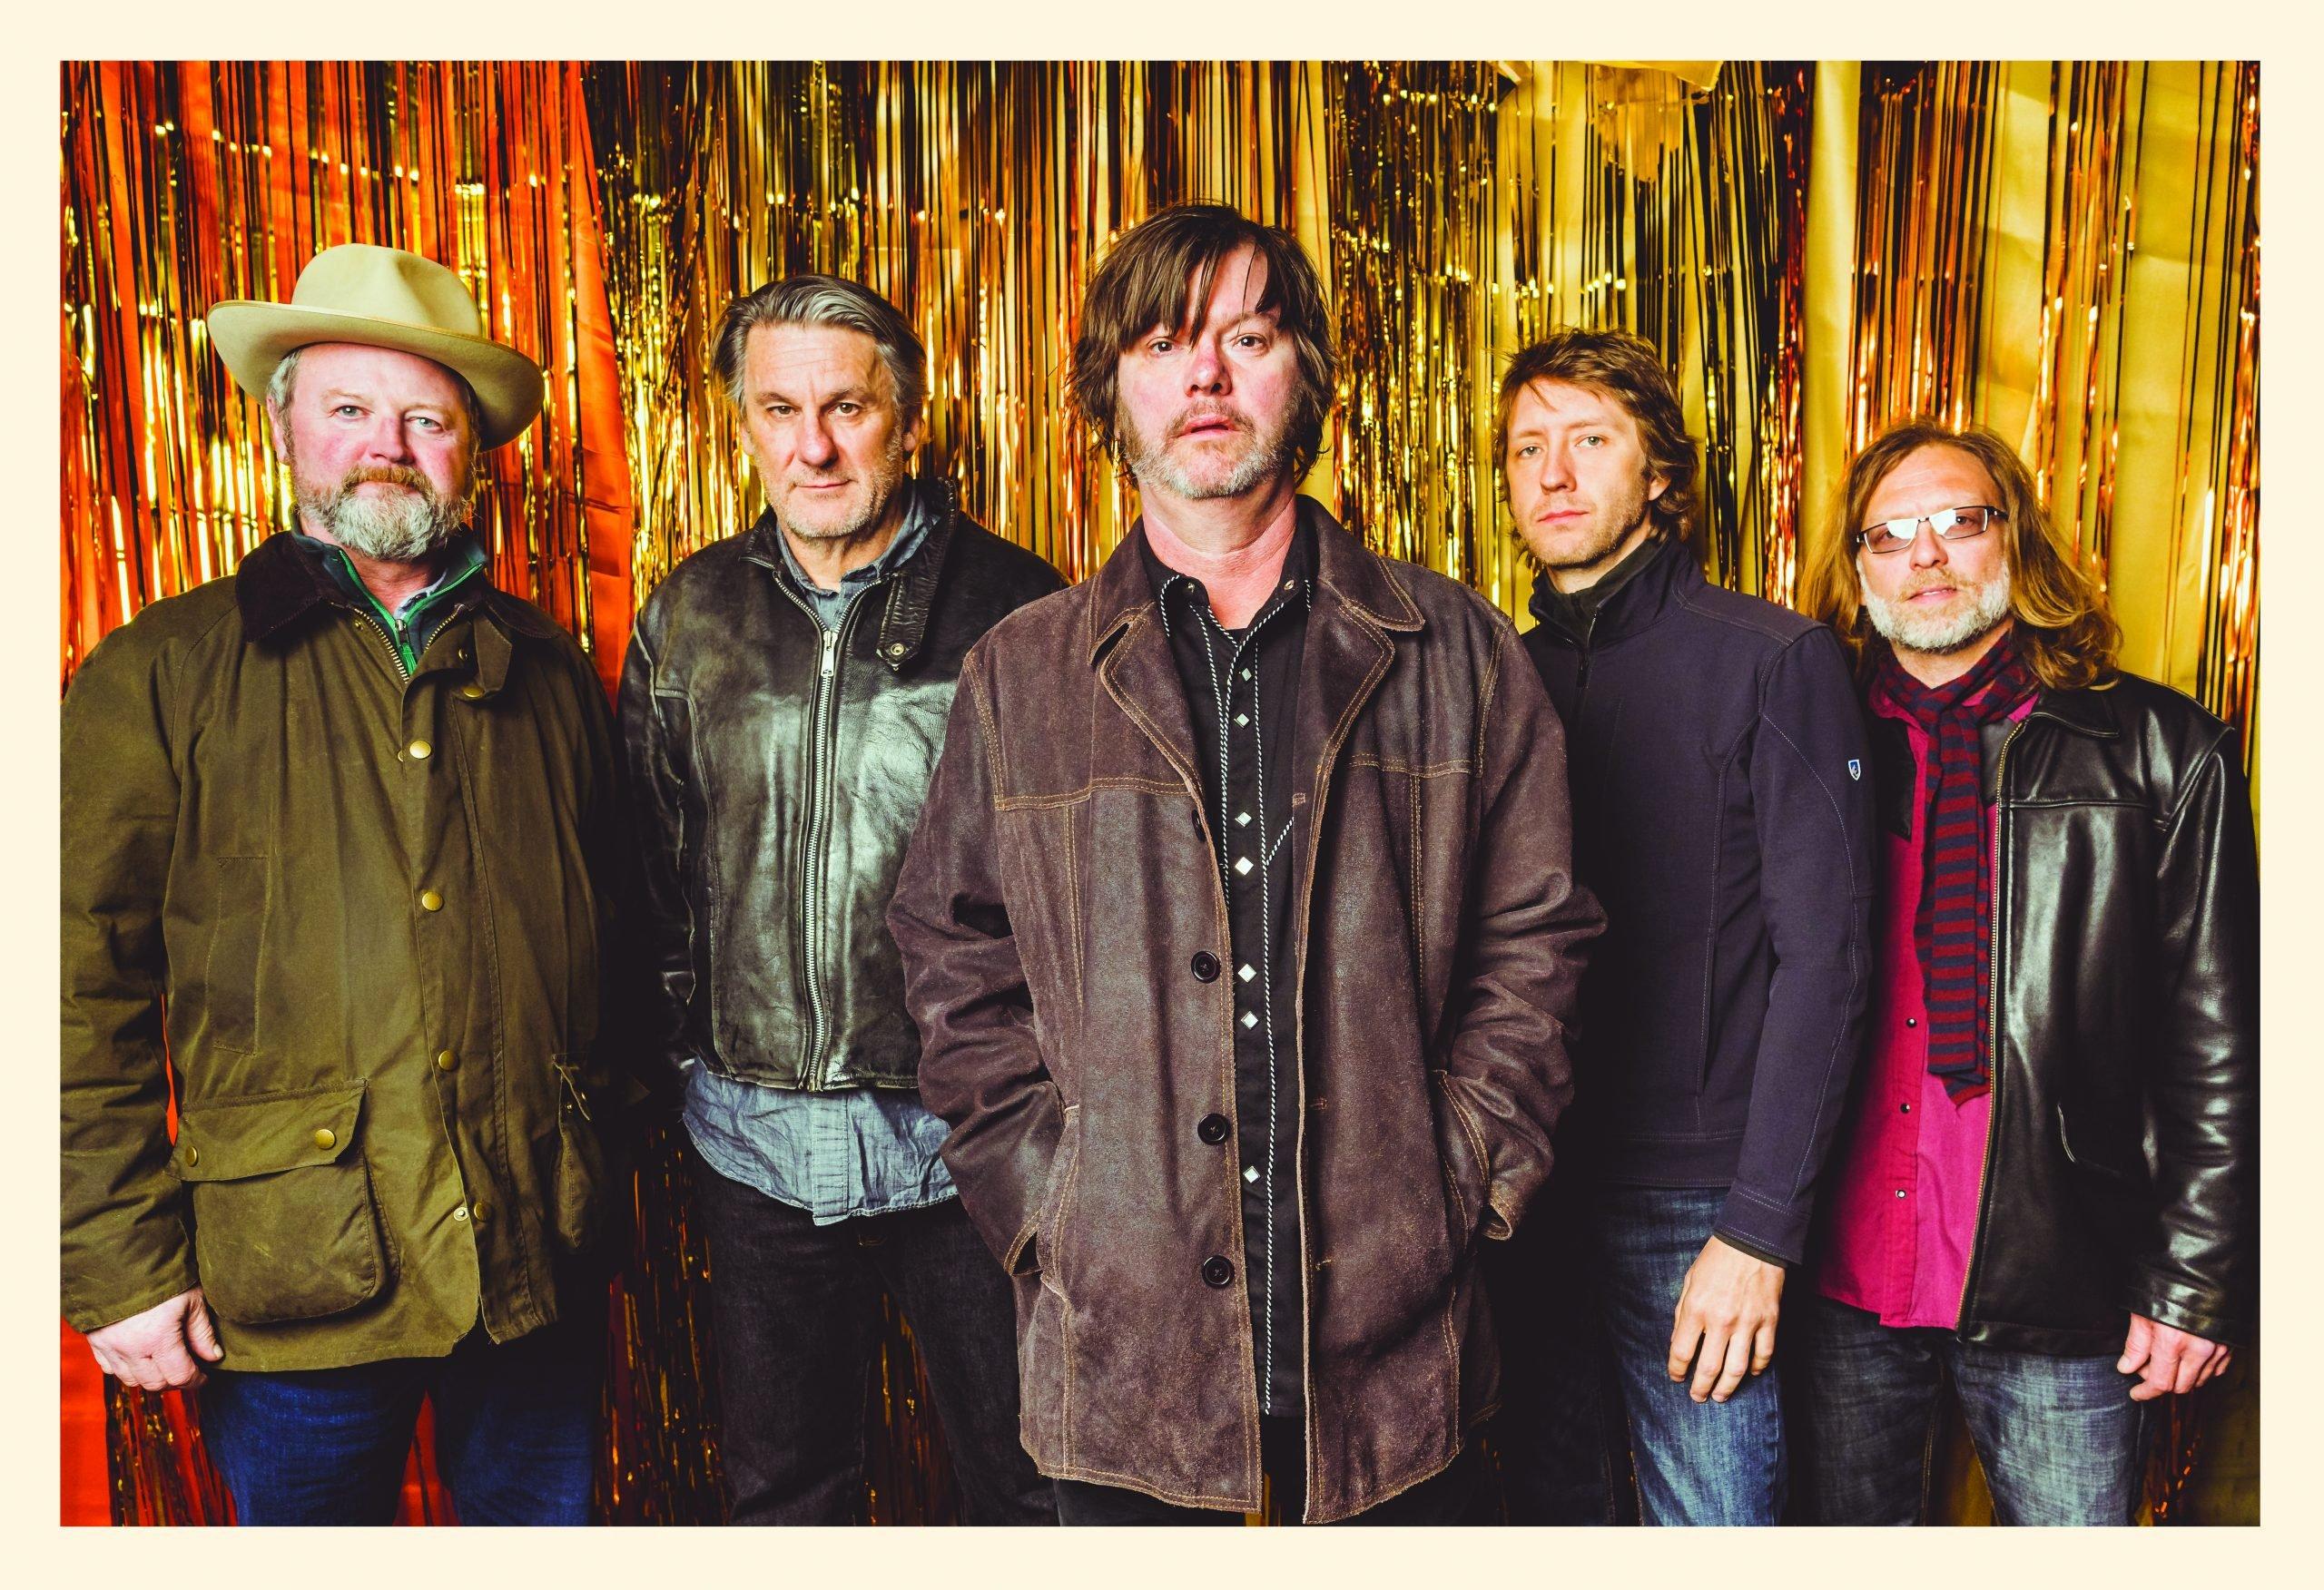 Jay Farrar On Son Volt's New Album 'Electro Melodier'  The Lifelong Draw  Of Electric Guitars,